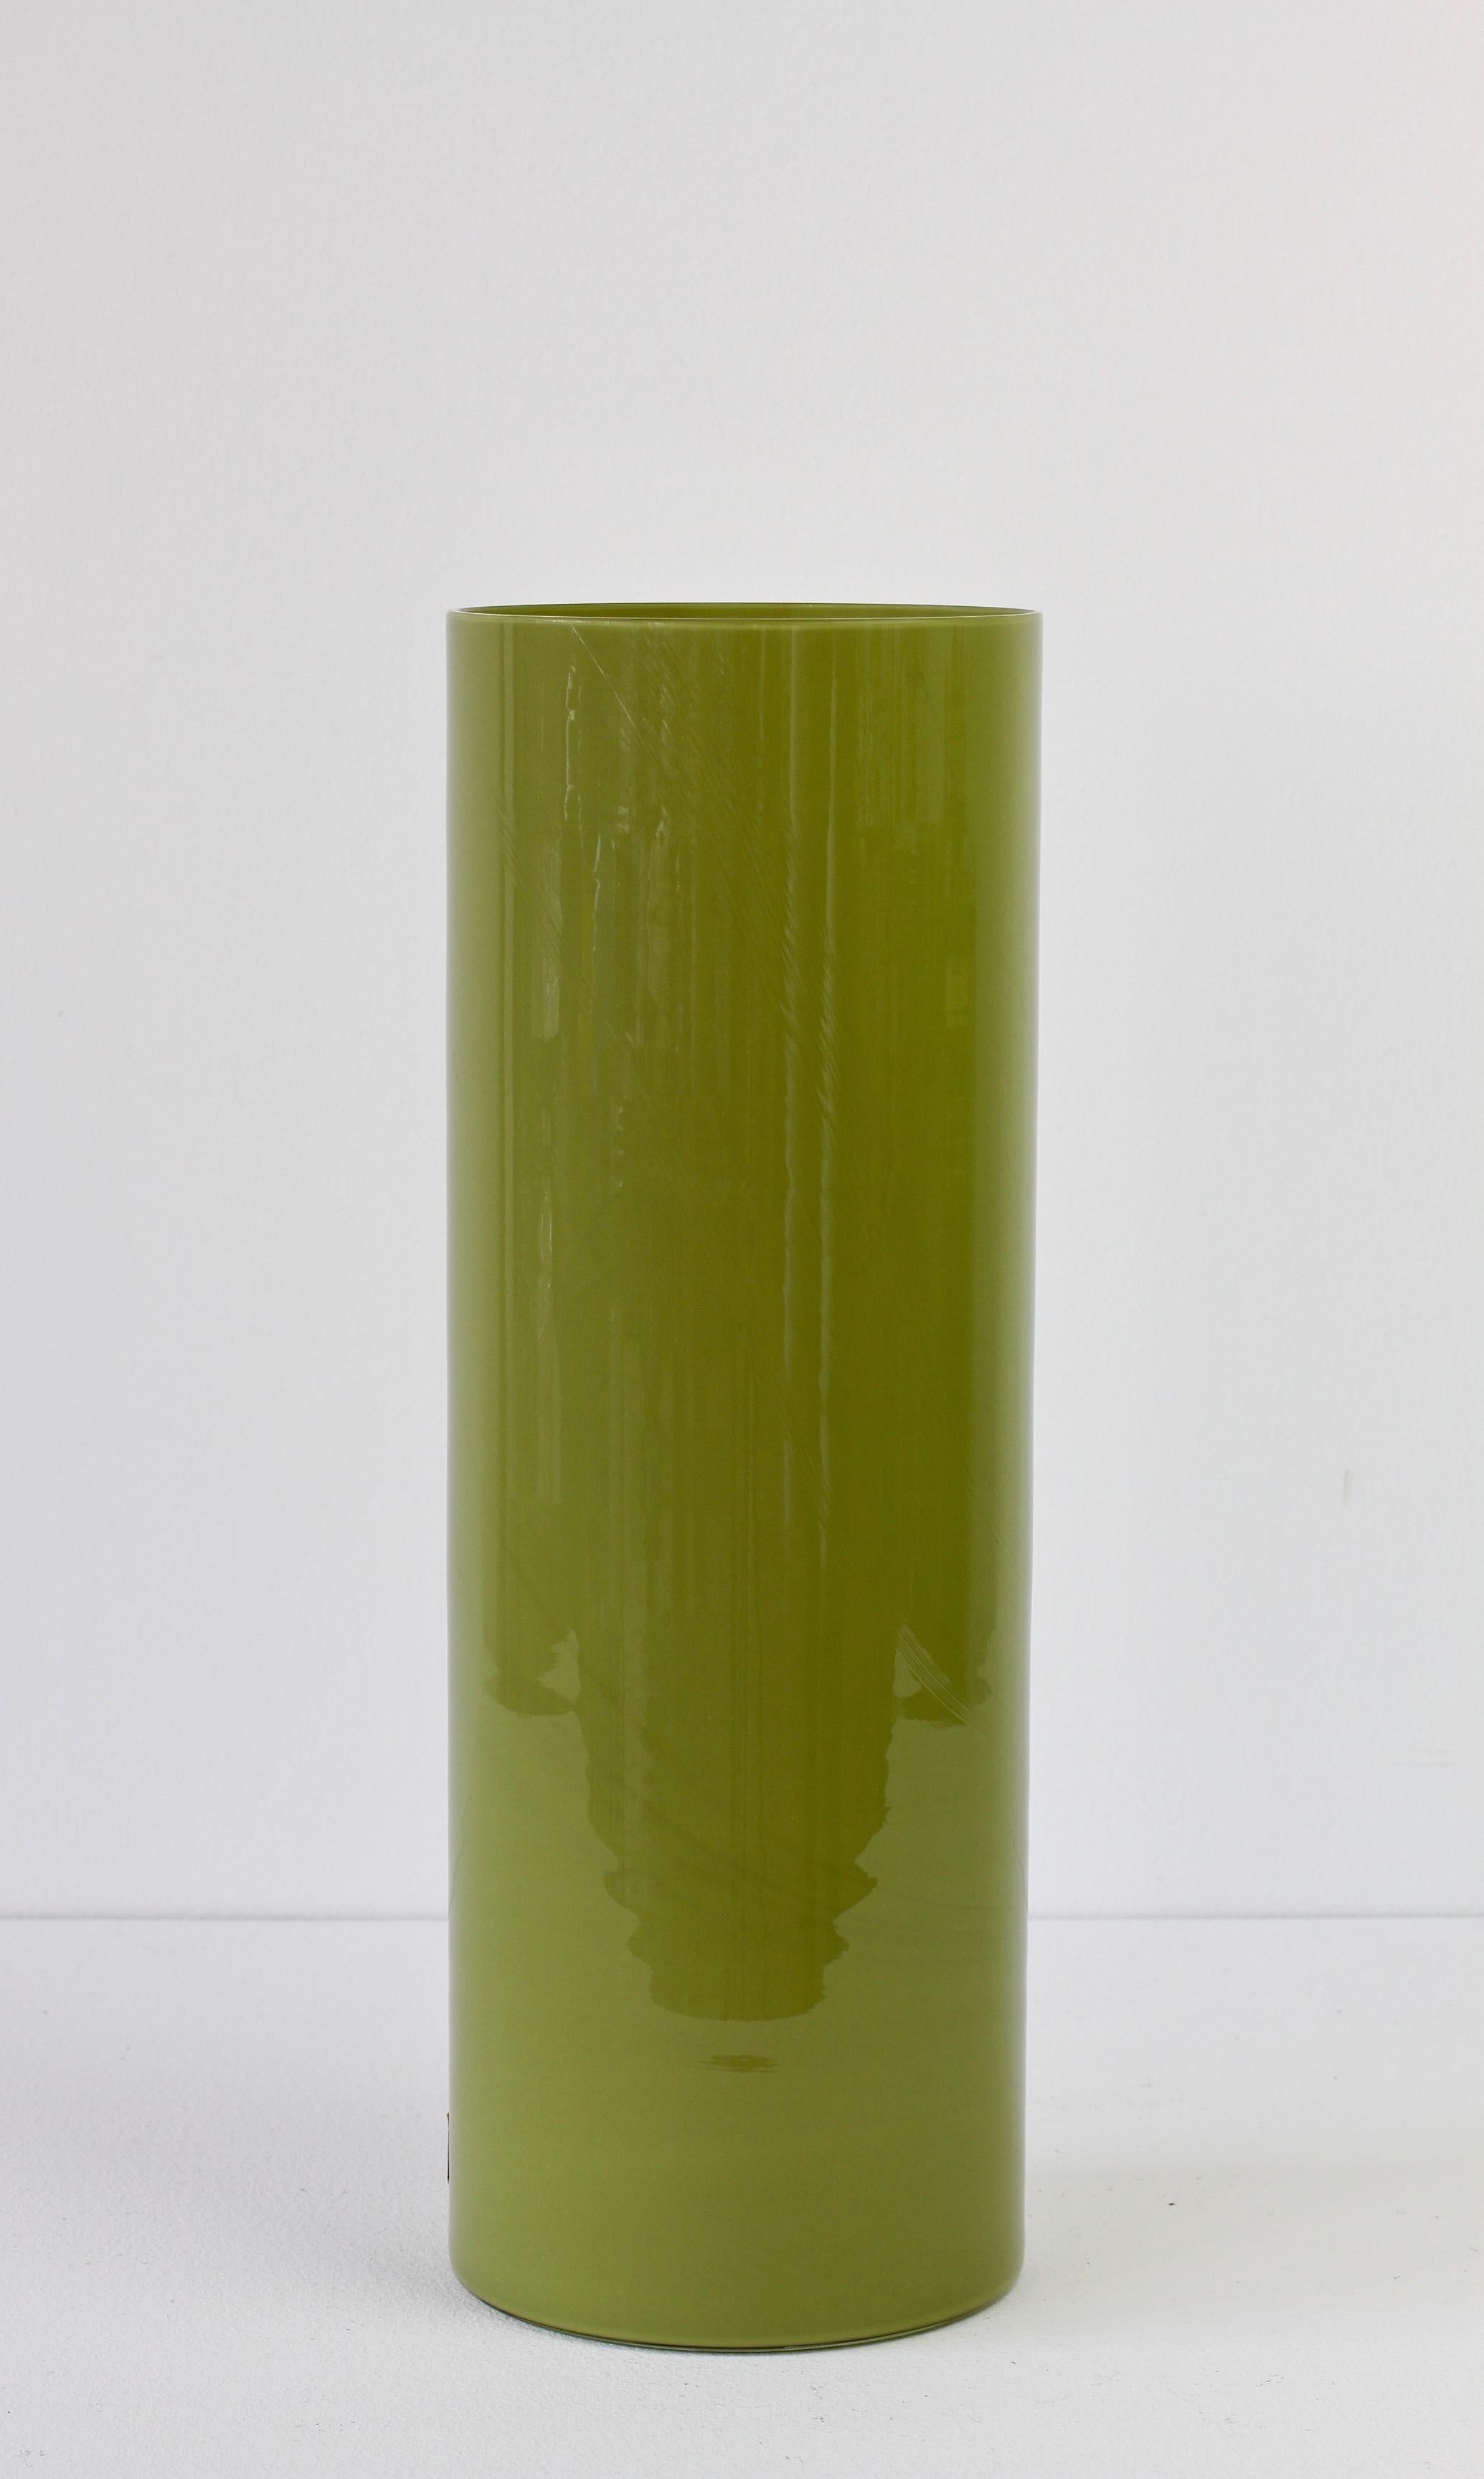 Large and tall apple or moss green Cenedese vintage Italian midcentury Murano glass vase, made in Italy, circa 1970-1990. Particularly striking is it's Minimalist form and large size, having all the characteristics of hand thrown pottery with the